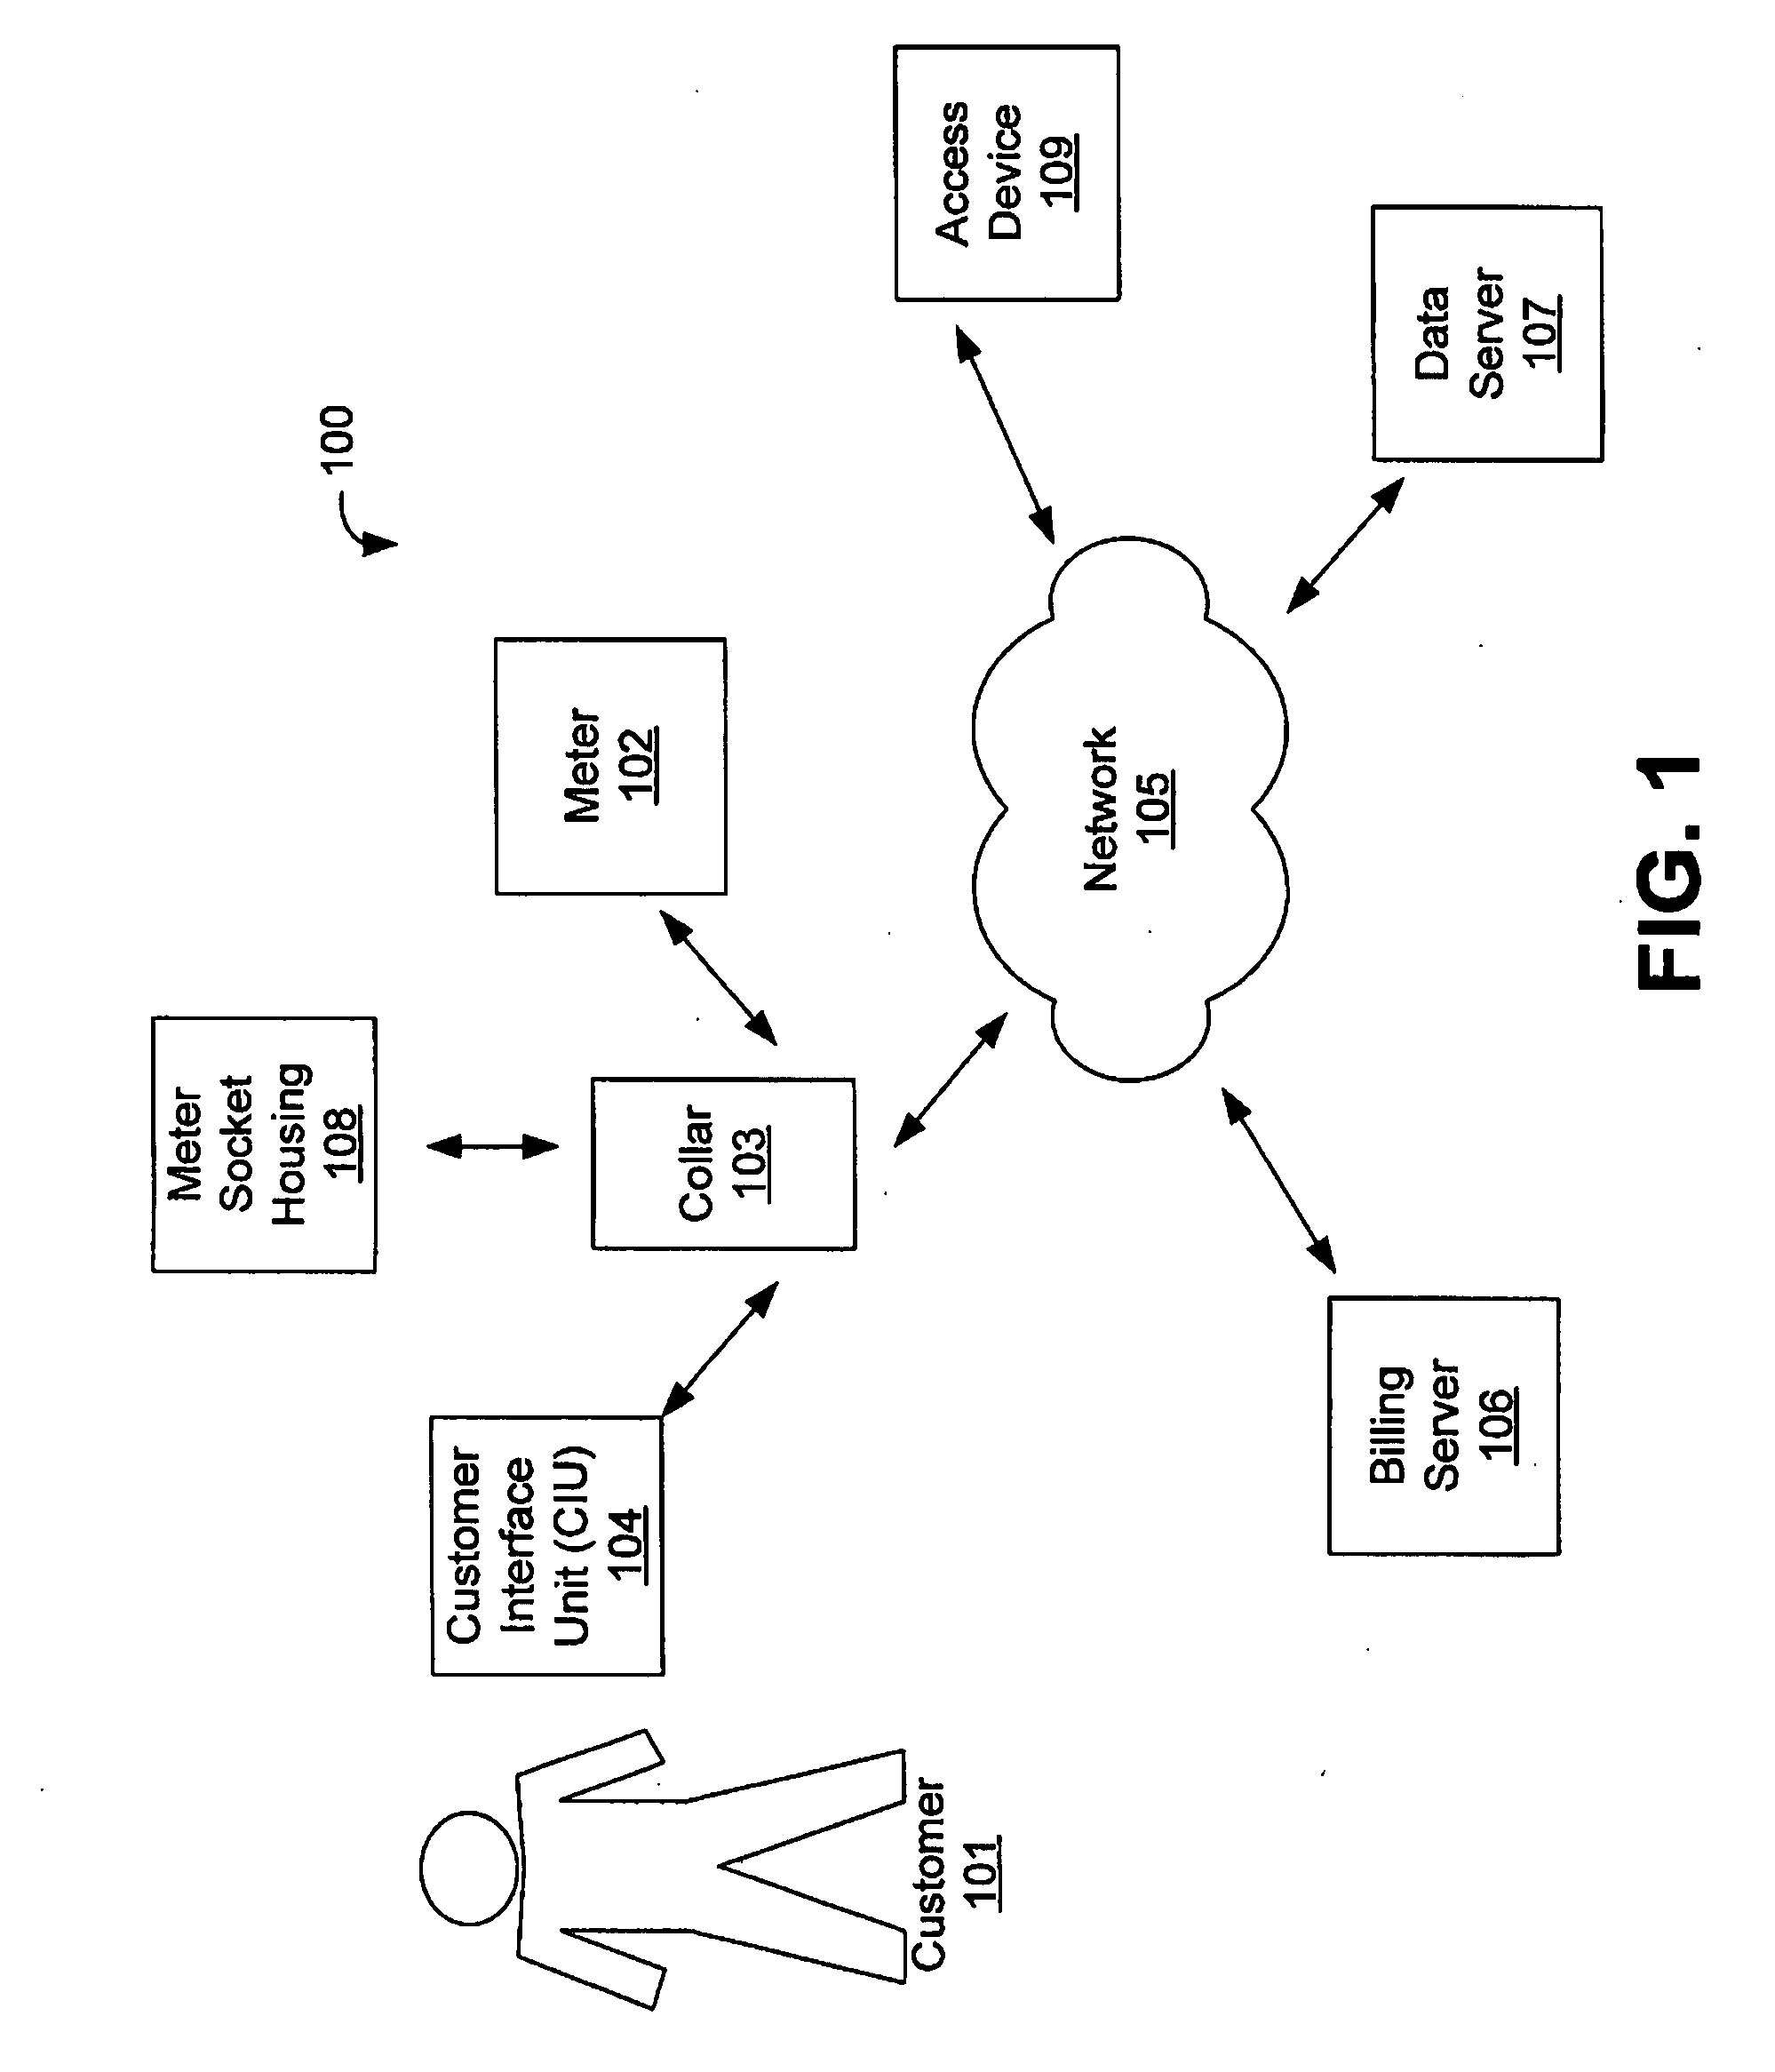 System and method for controlling a utility meter